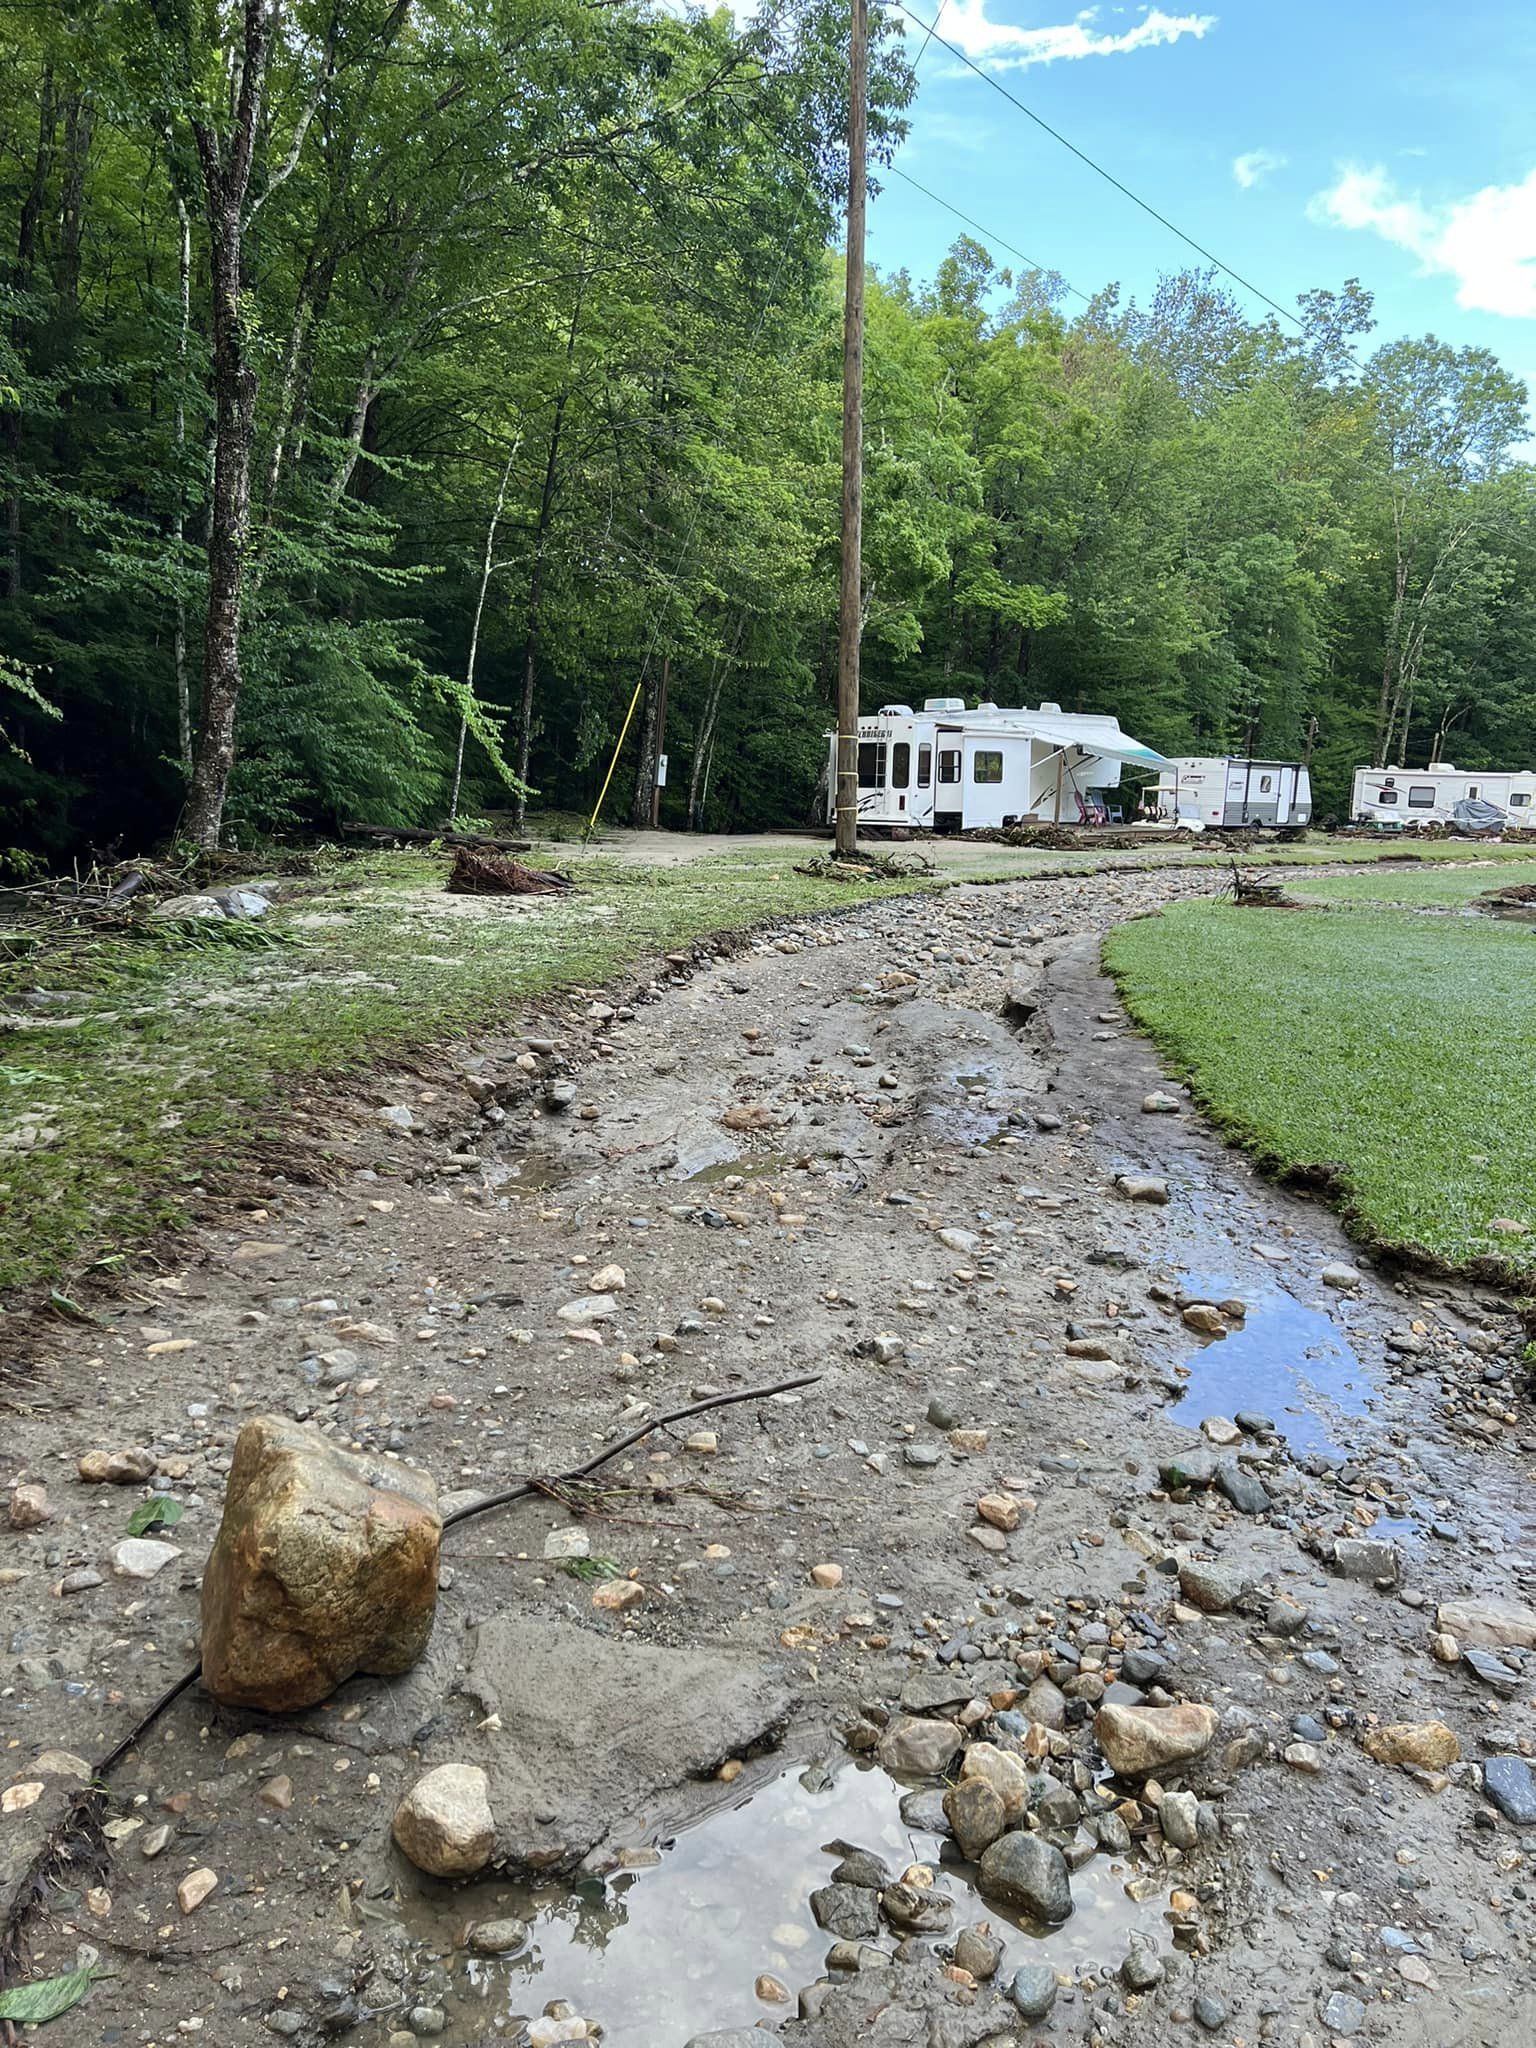 RV One, Vermont Park Recovering After Severe Flooding